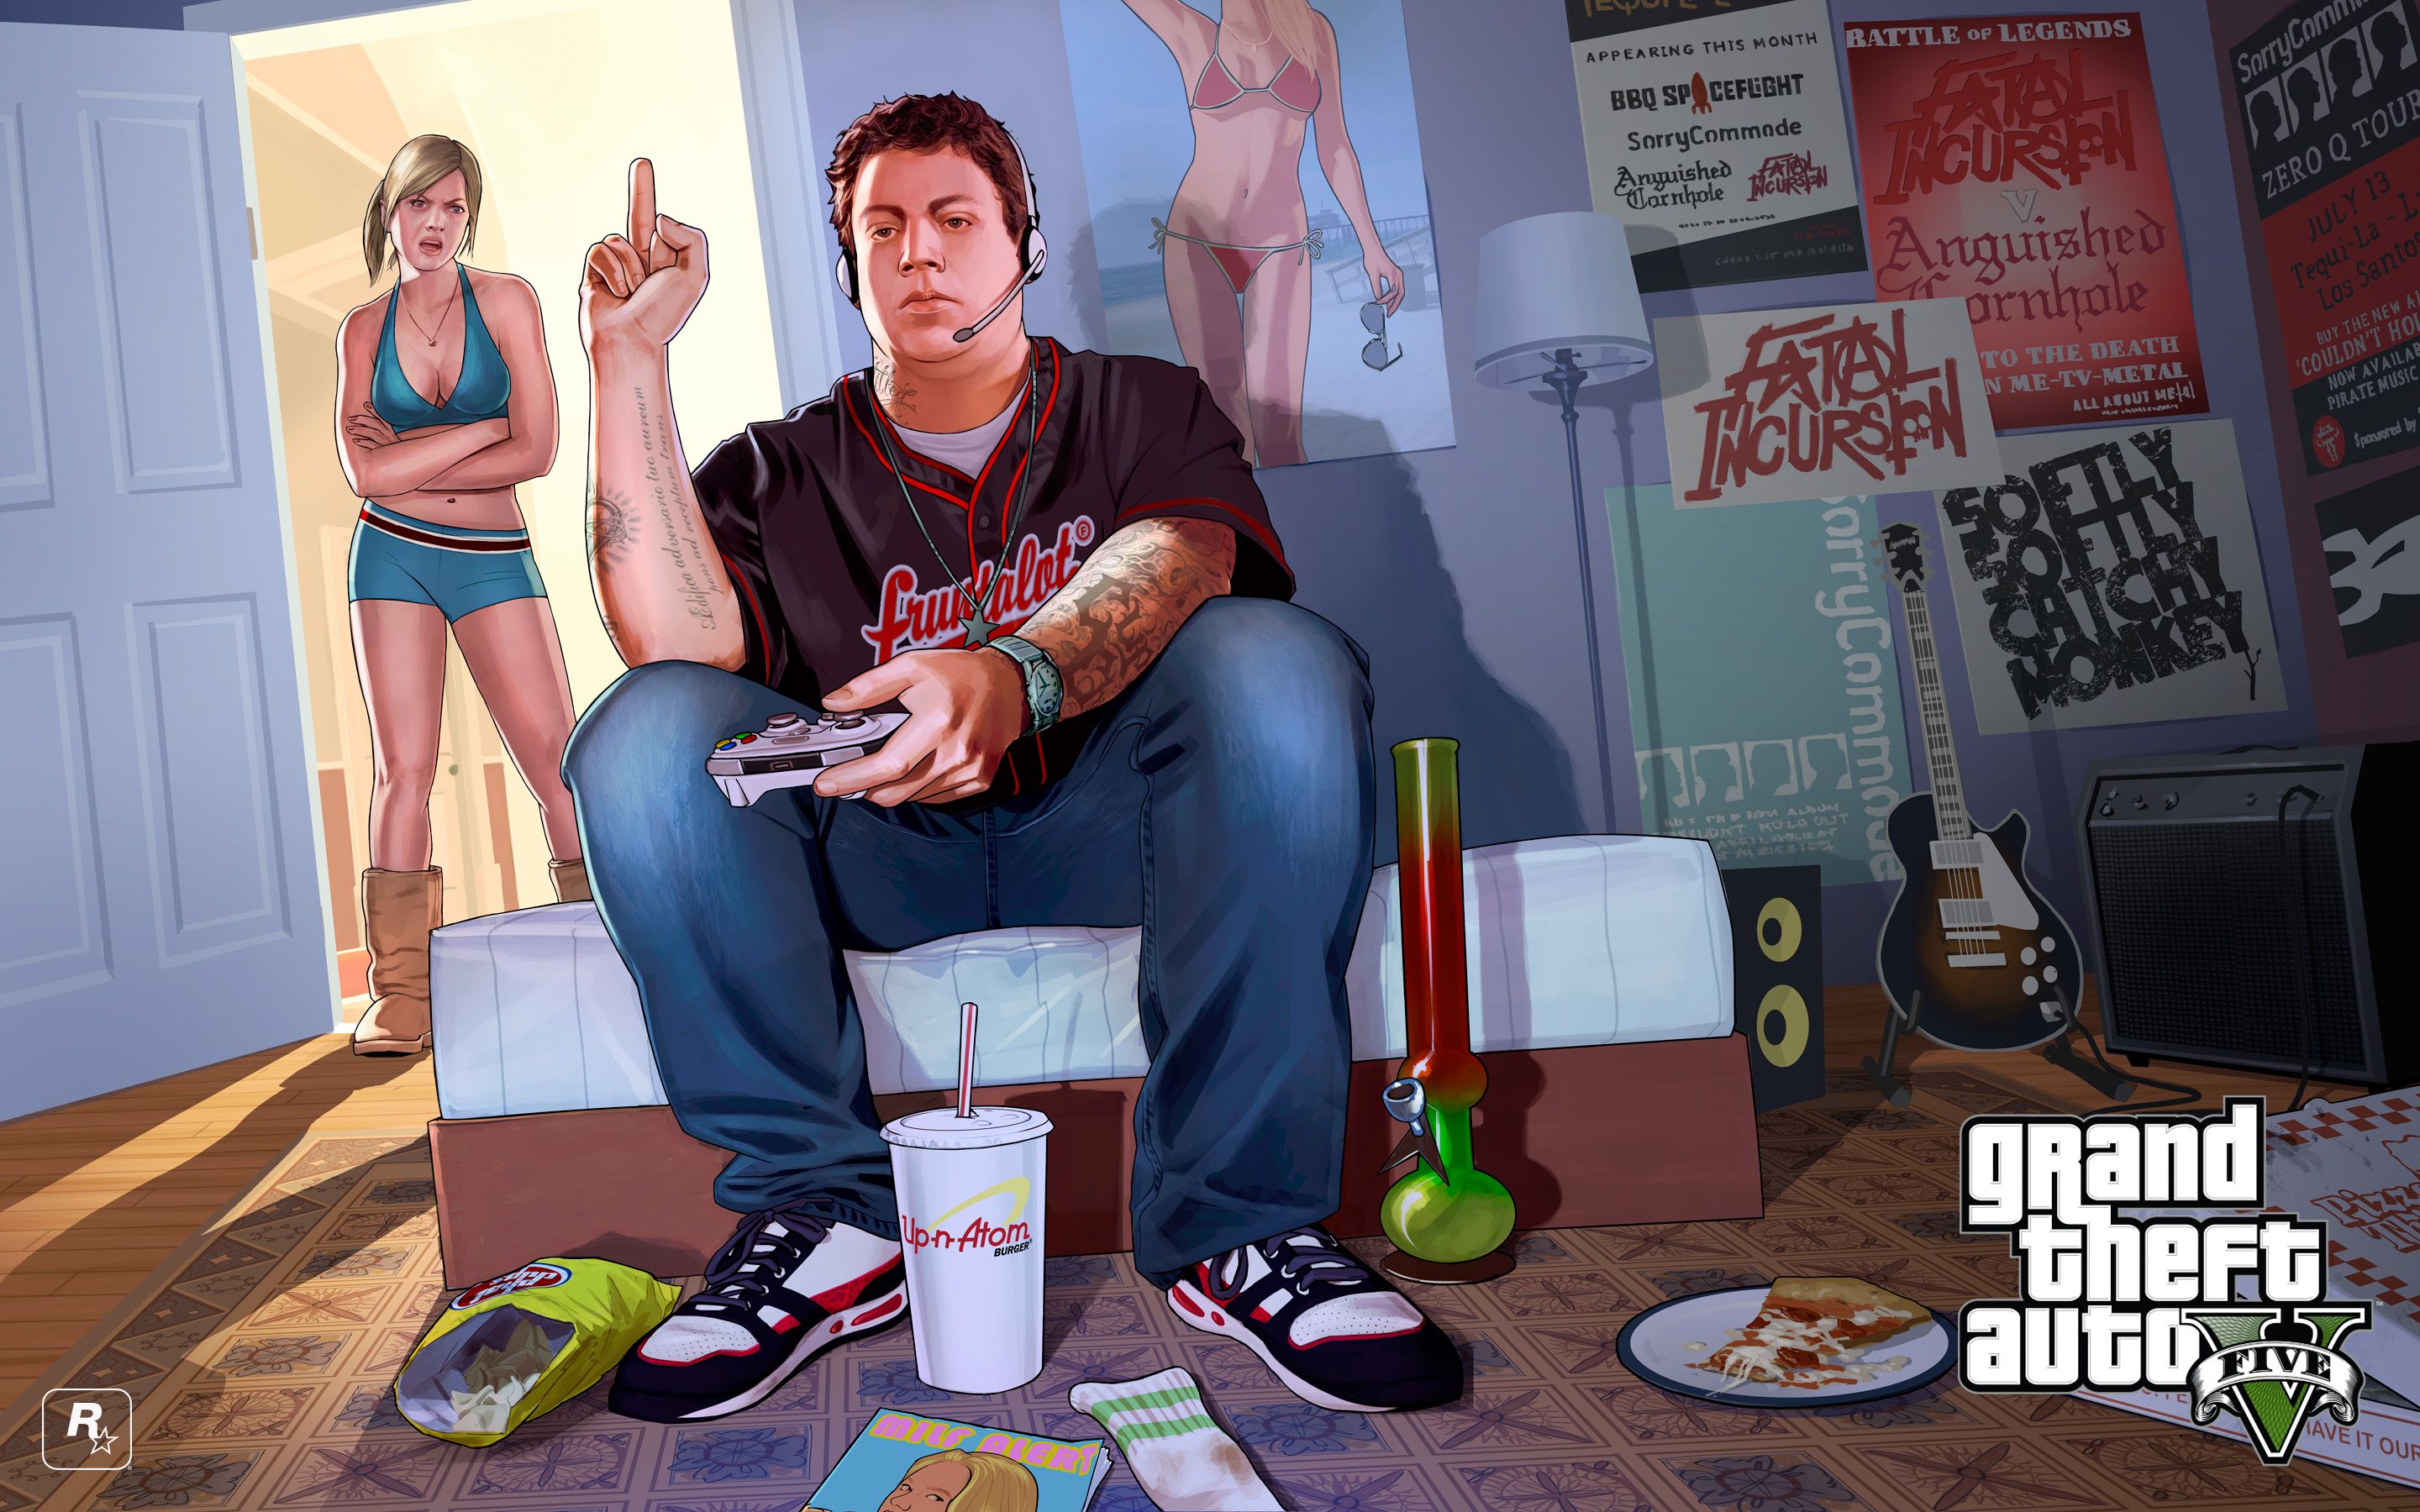 Grand Theft Auto 5 HD Backgrounds